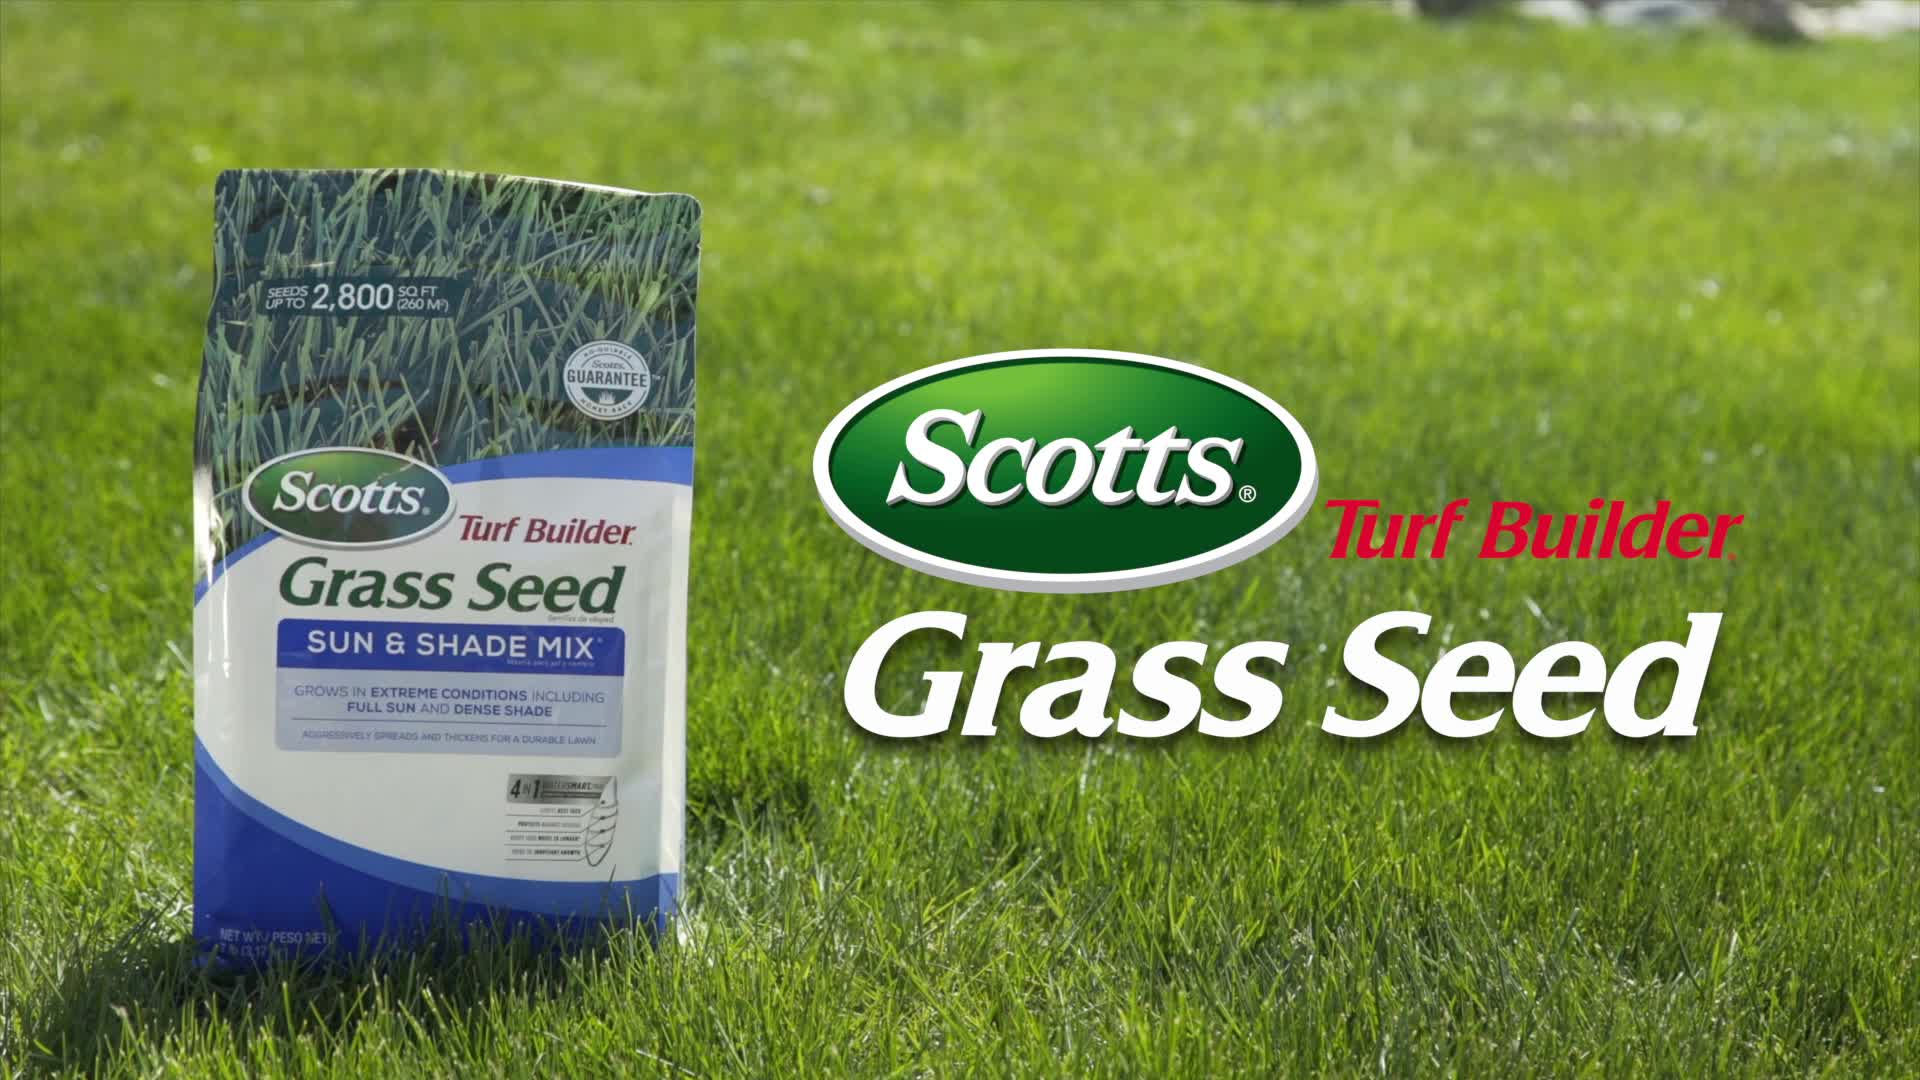 Scotts Turf Builder Tall Fescue Grass Seed Mix Lawn Landscape  Drought Tolerant